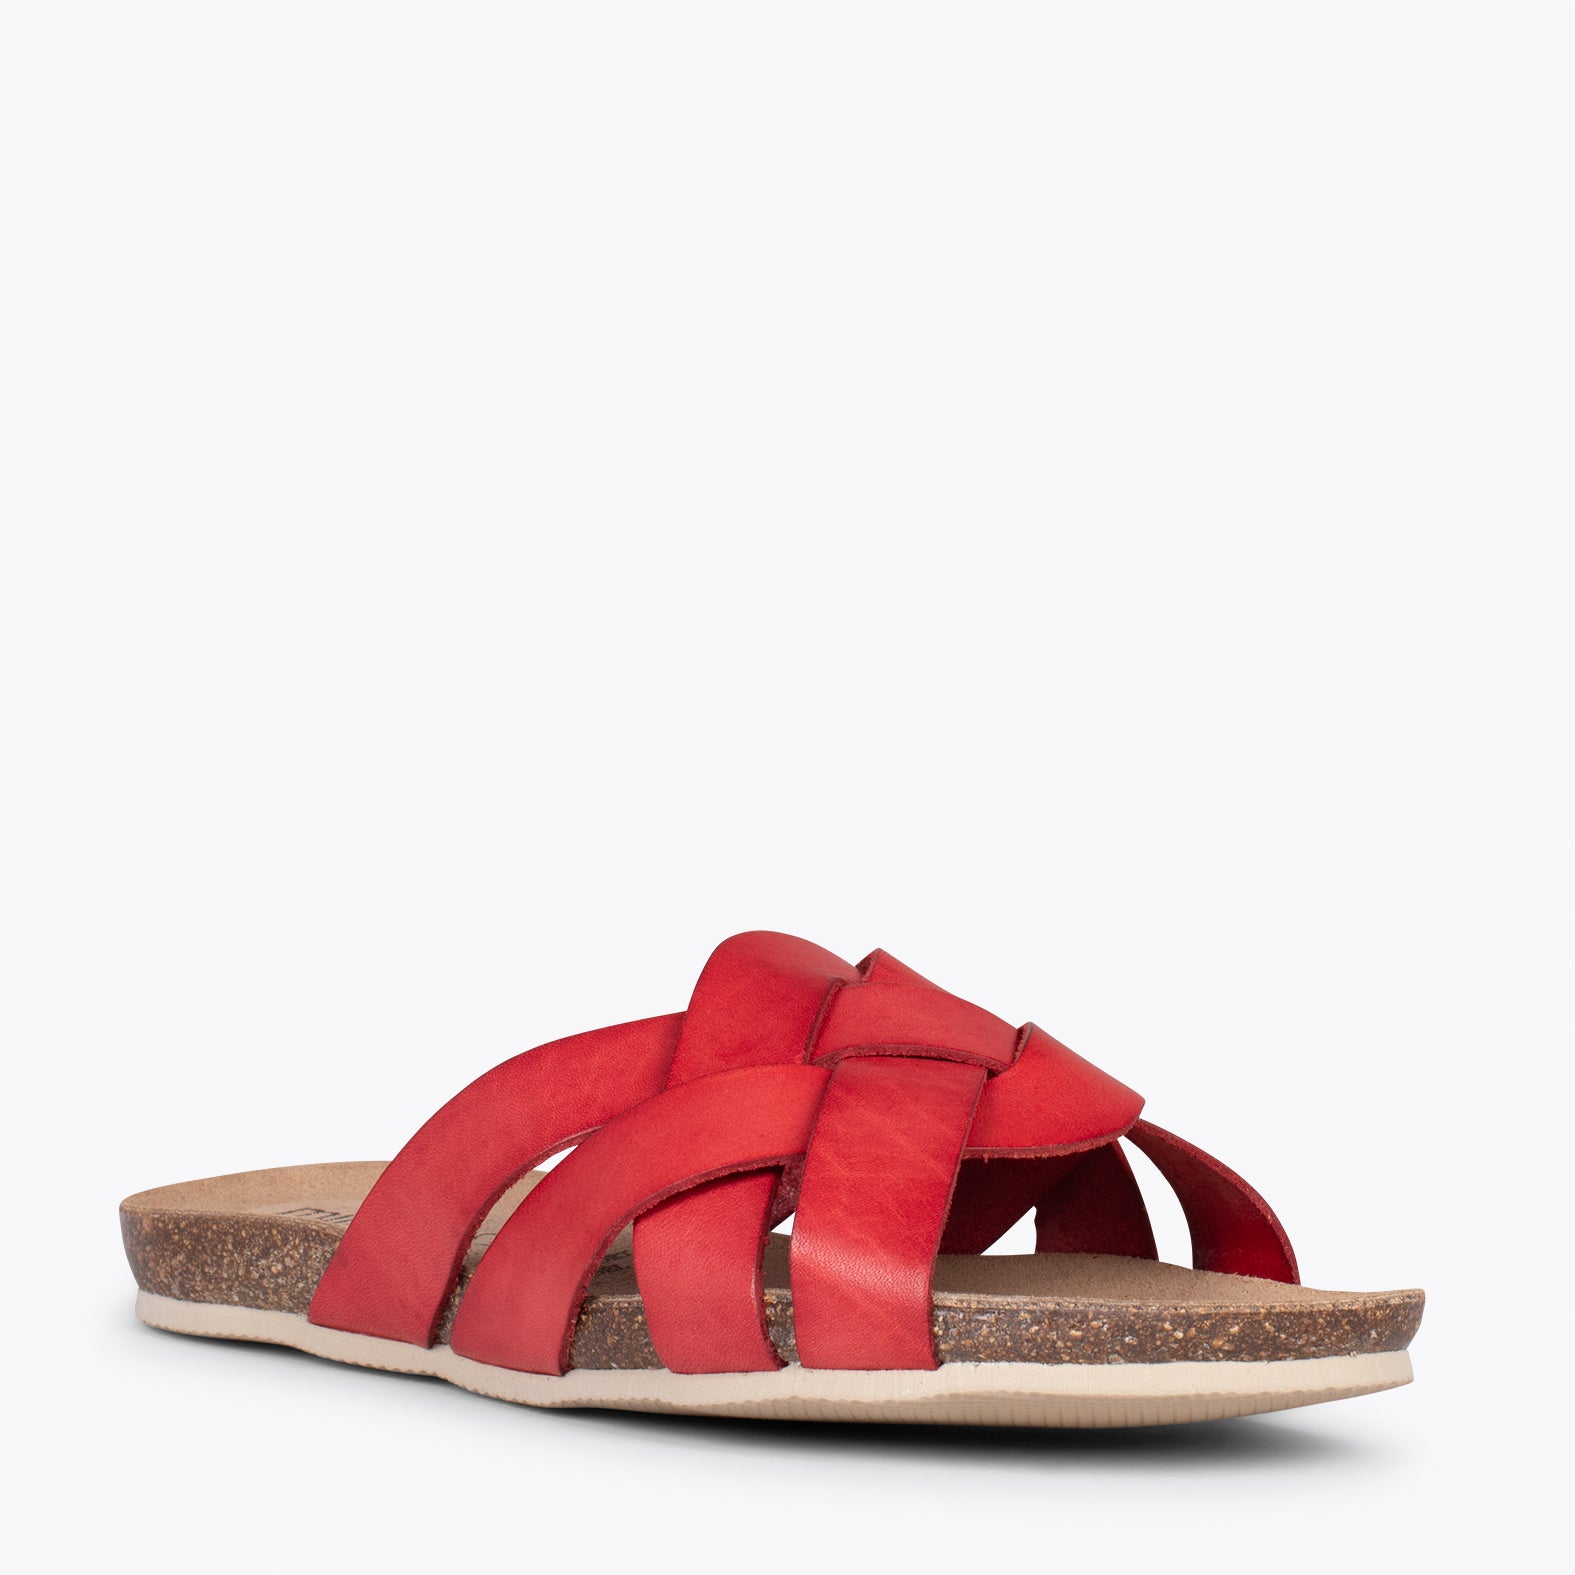 DHALIA – RED slides with braided upper